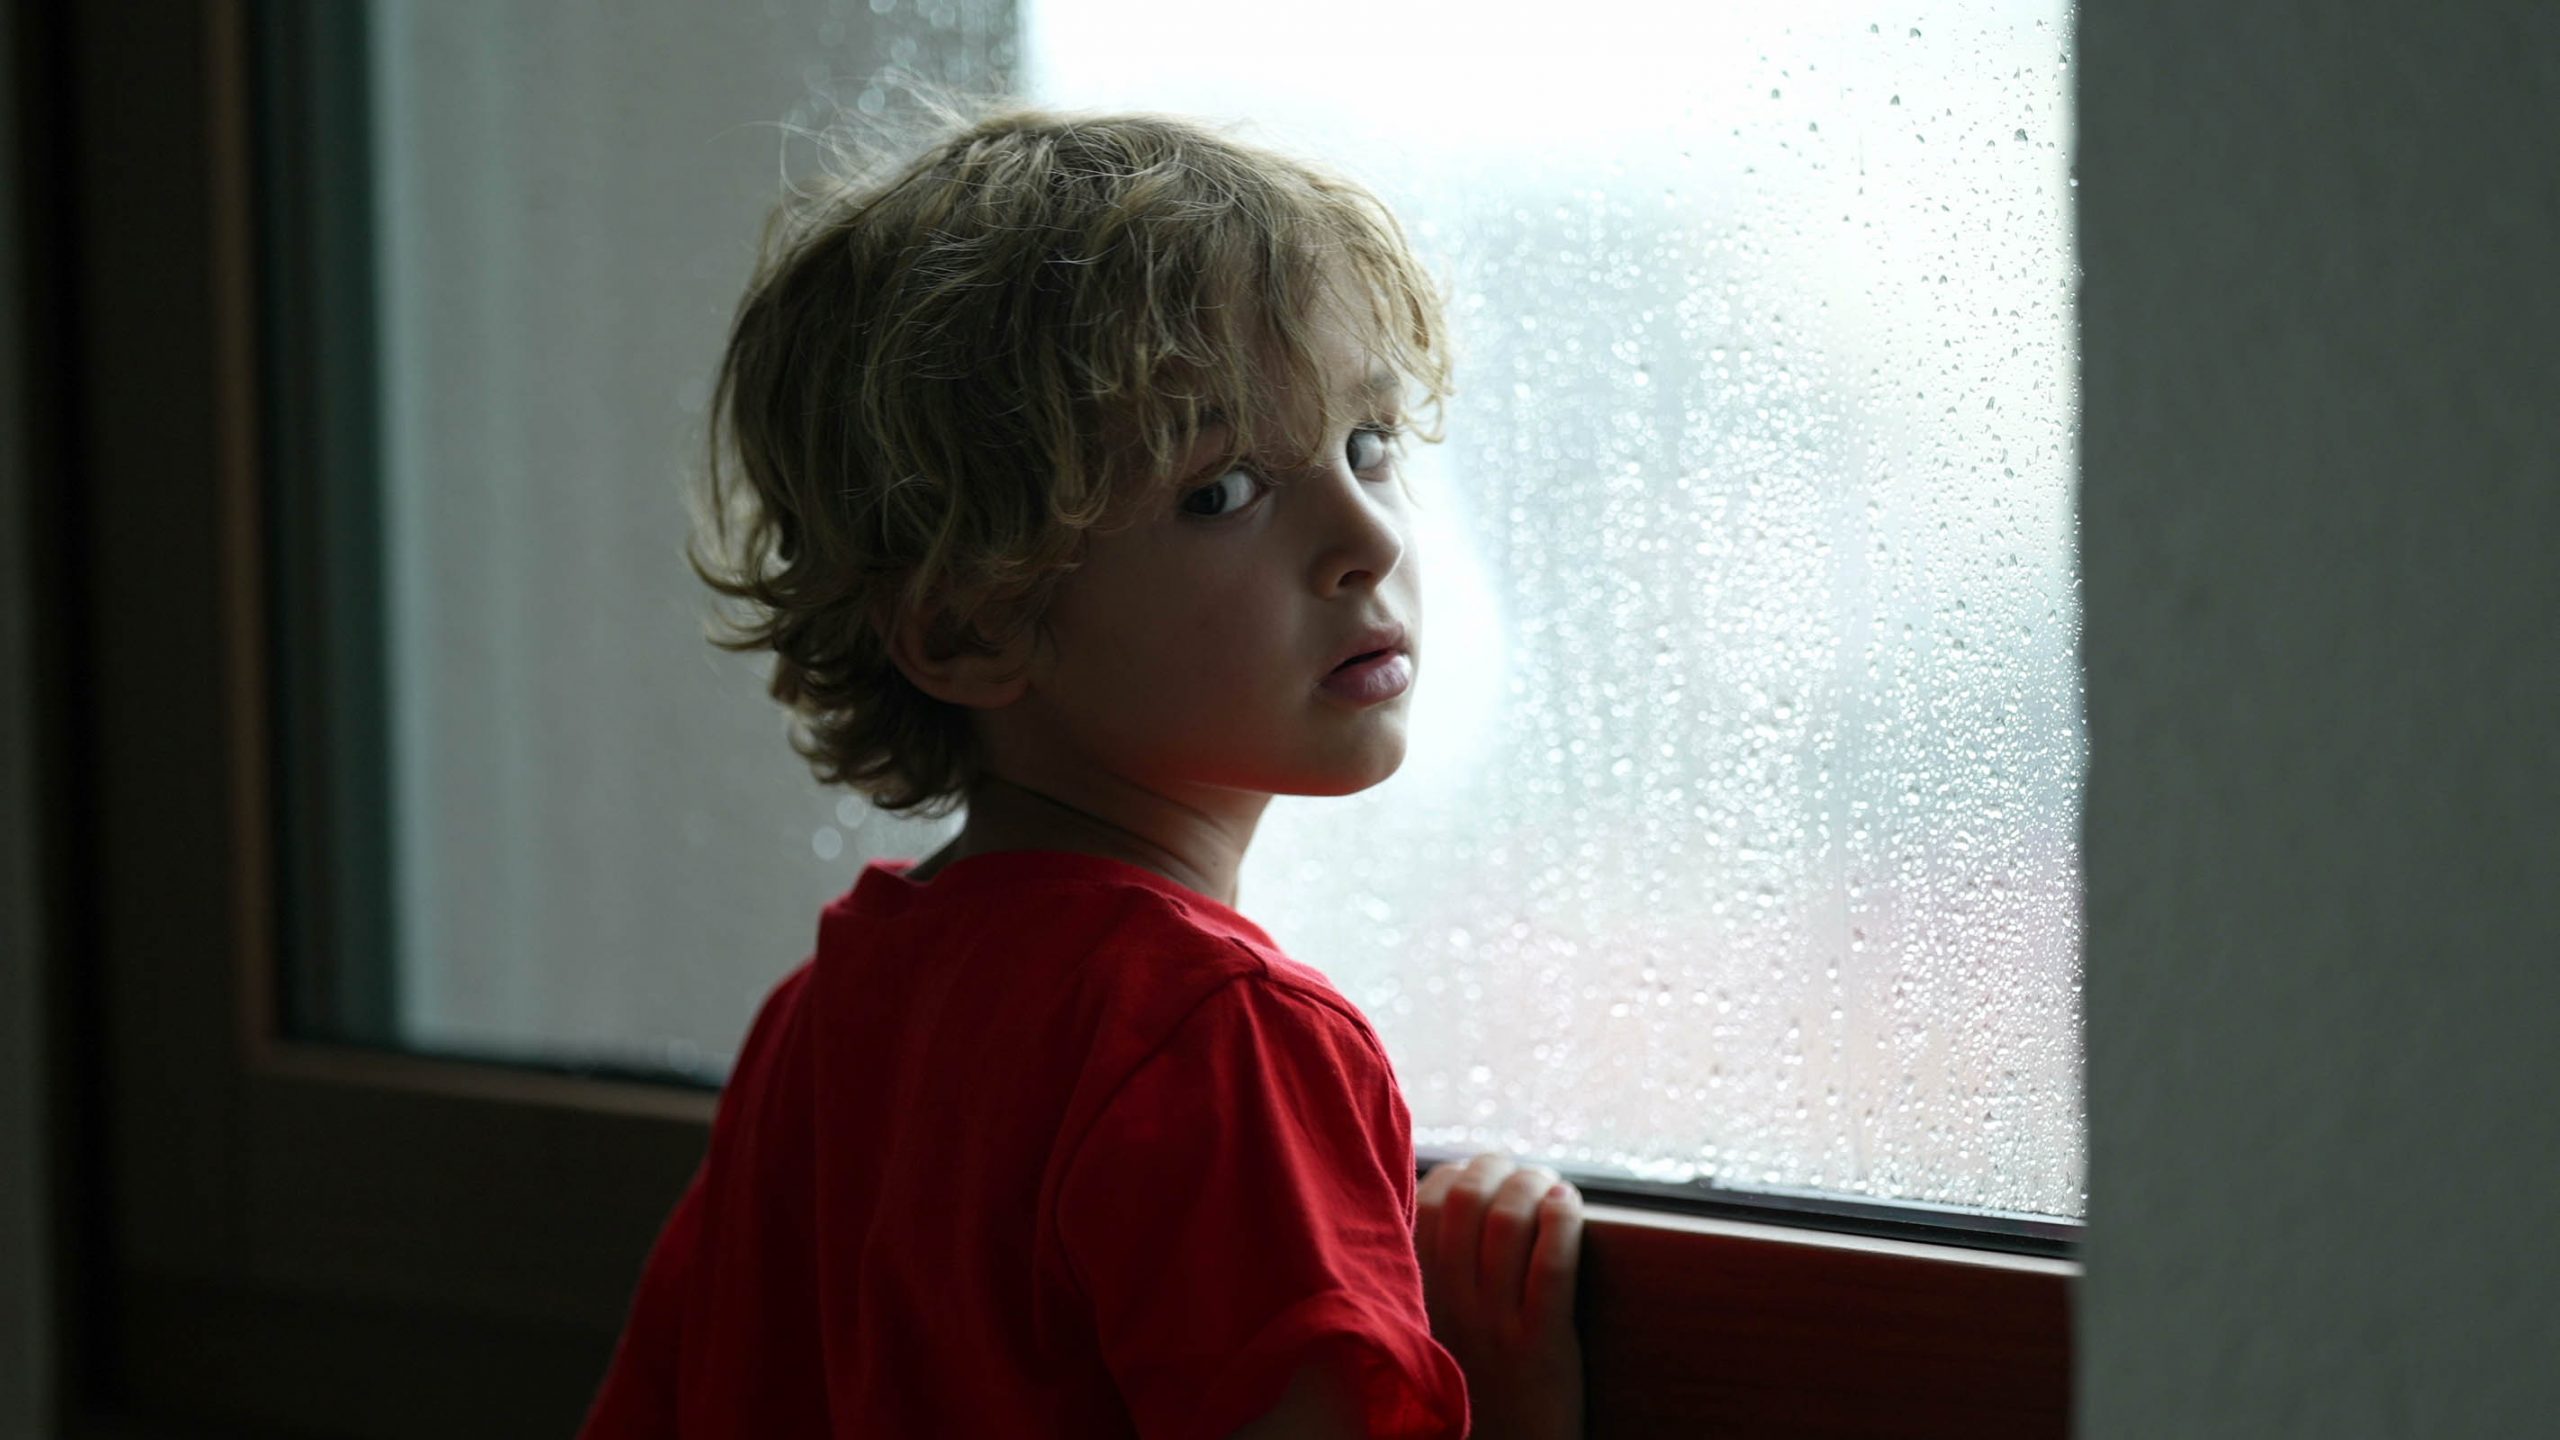 A thoughtful child in a red shirt looks out of a window dotted with raindrops, suggesting introspection and the quiet stillness of being indoors during rainy weather.